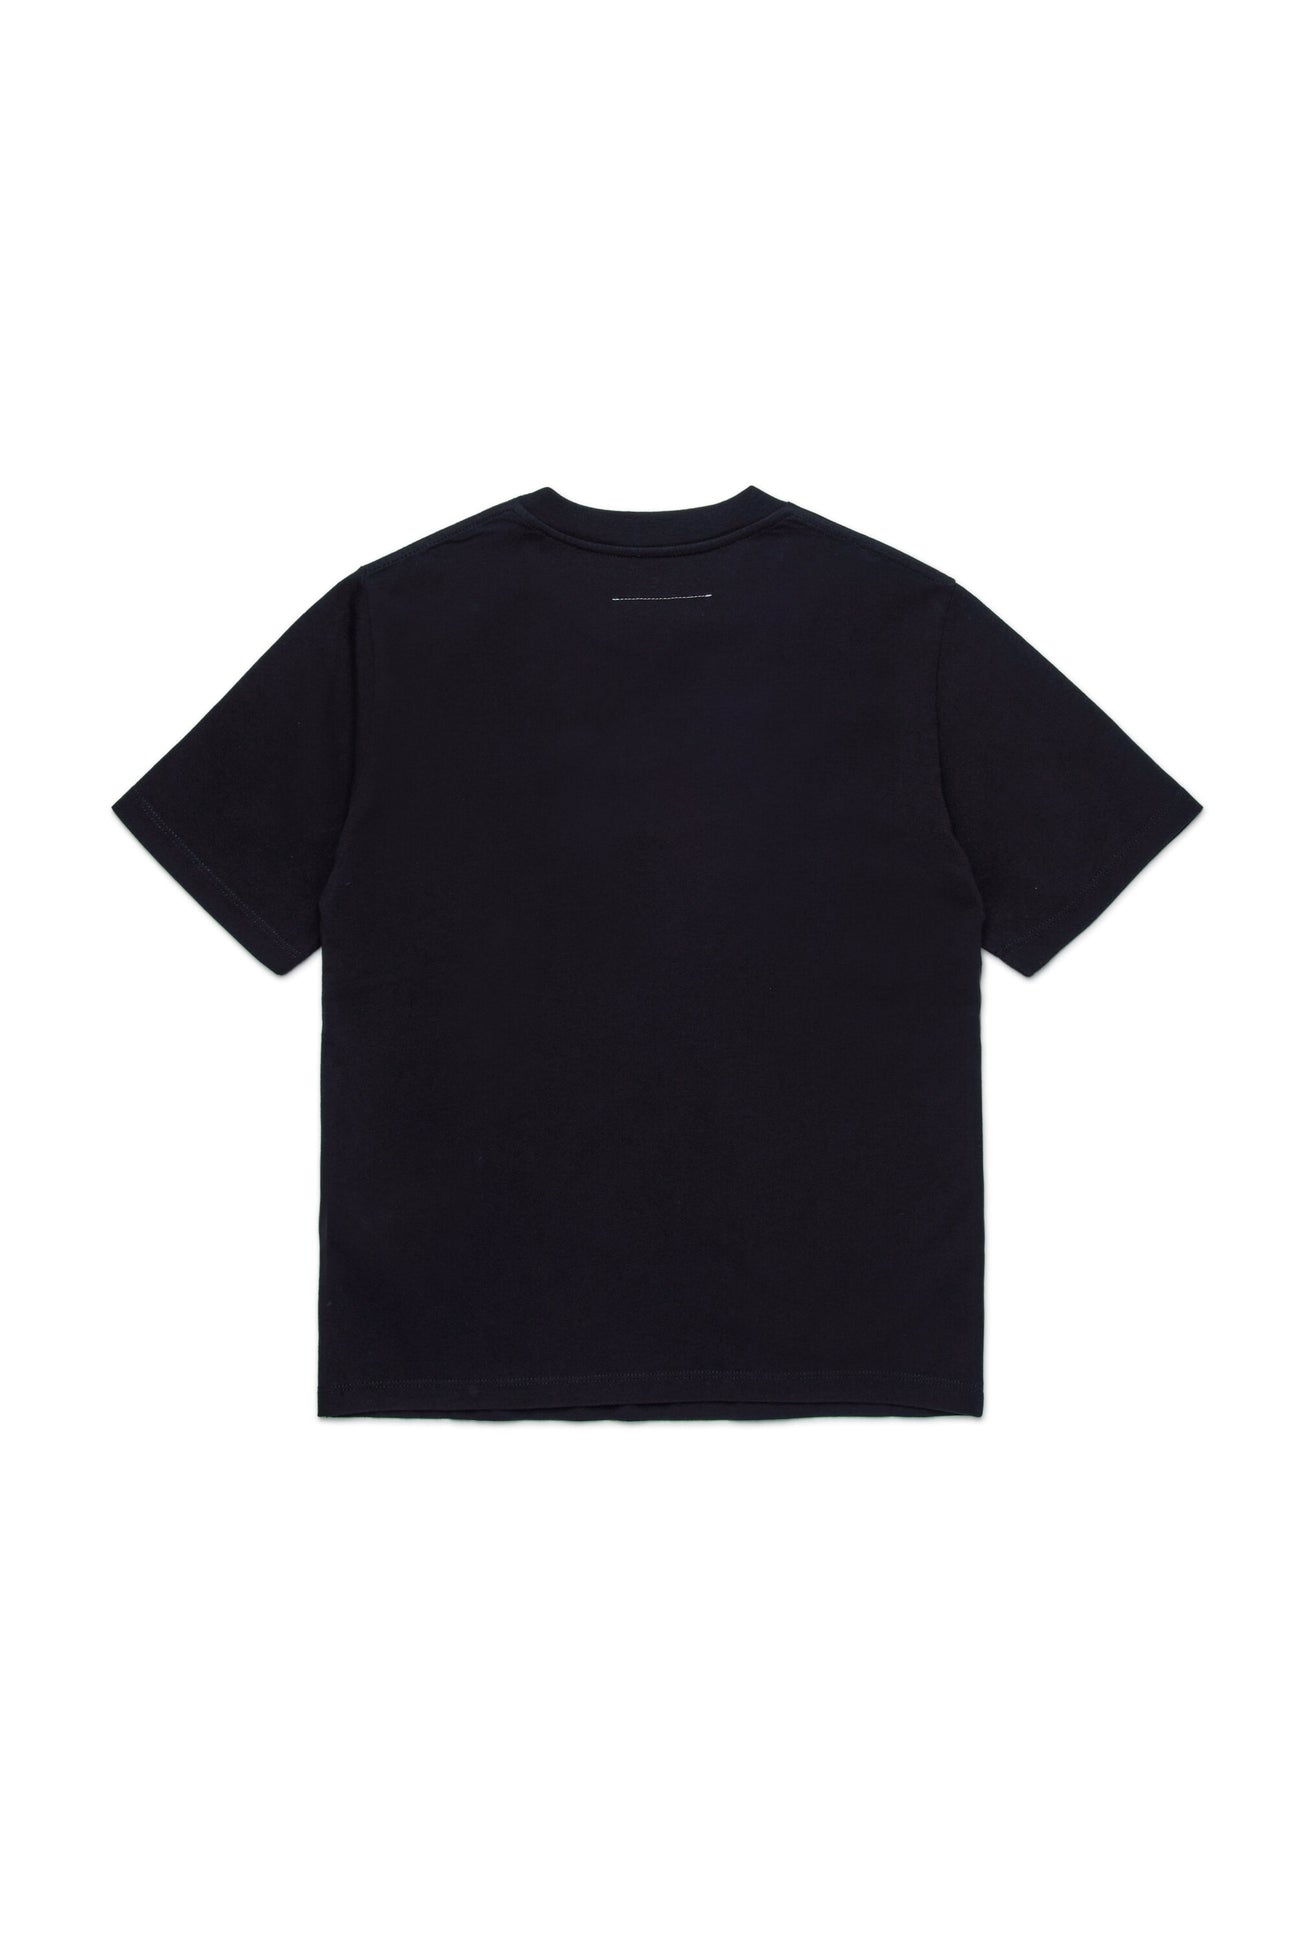 Torn T-shirt branded with numeric logo Torn T-shirt branded with numeric logo